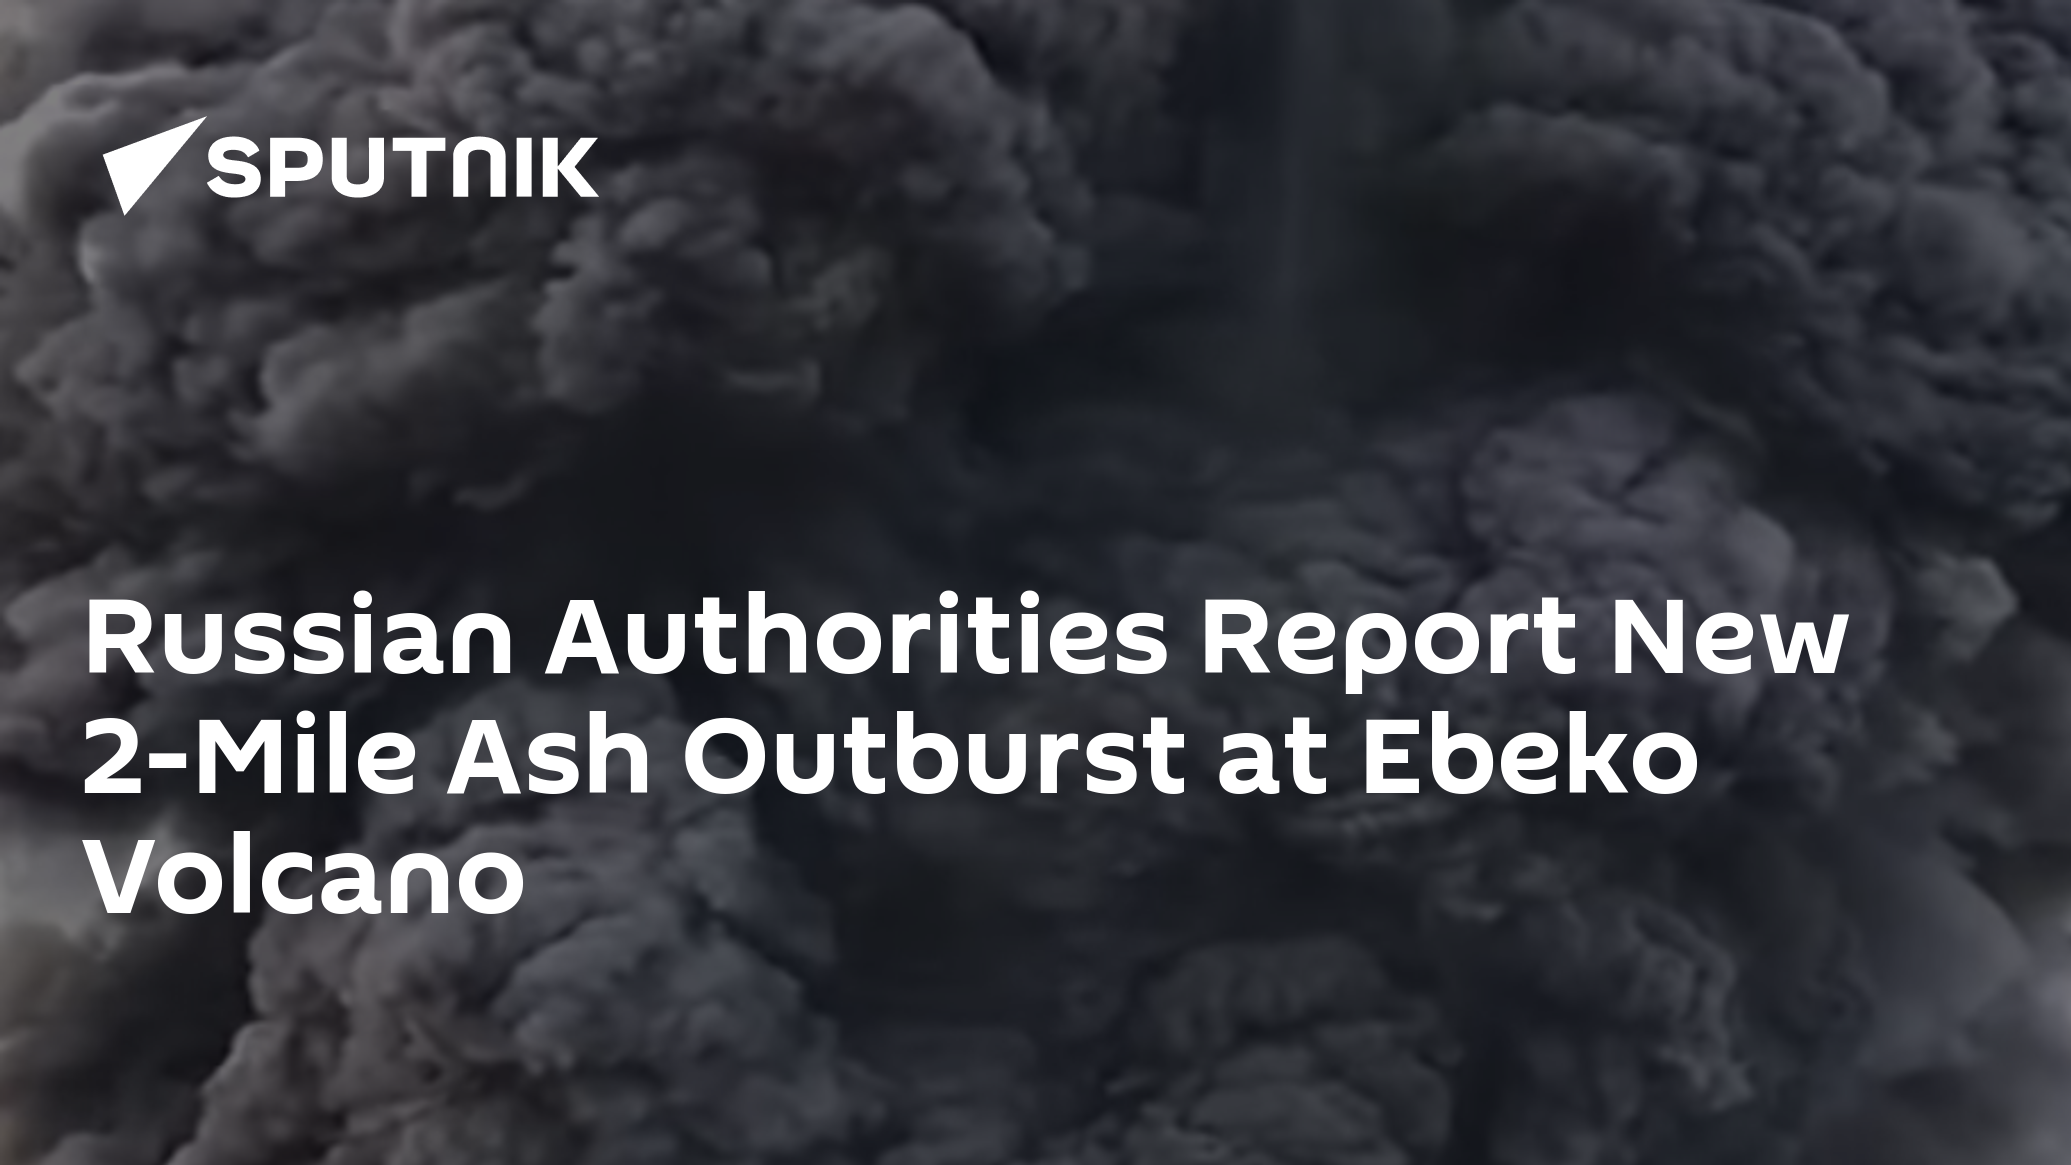 Russian Authorities Report New 2-Mile Ash Outburst at Ebeko Volcano